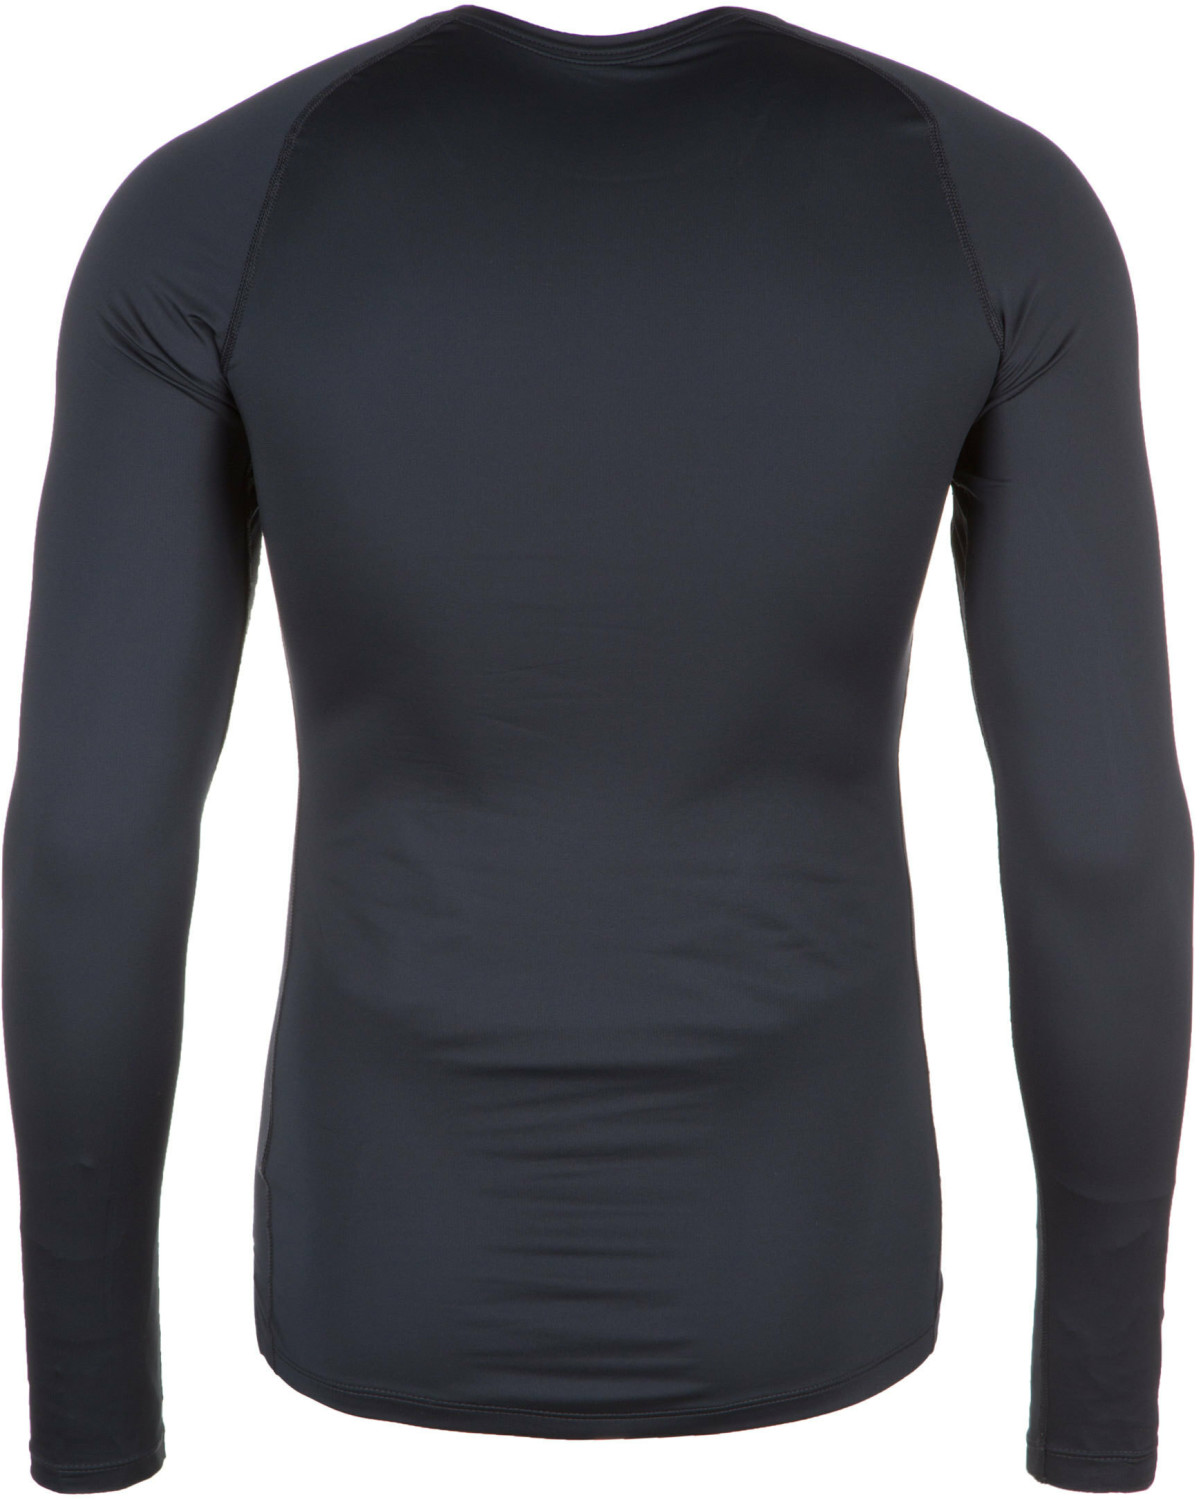 Buy Nike Pro Tight-Fit Long-Sleeve Top black/white from £22.99 (Today ...